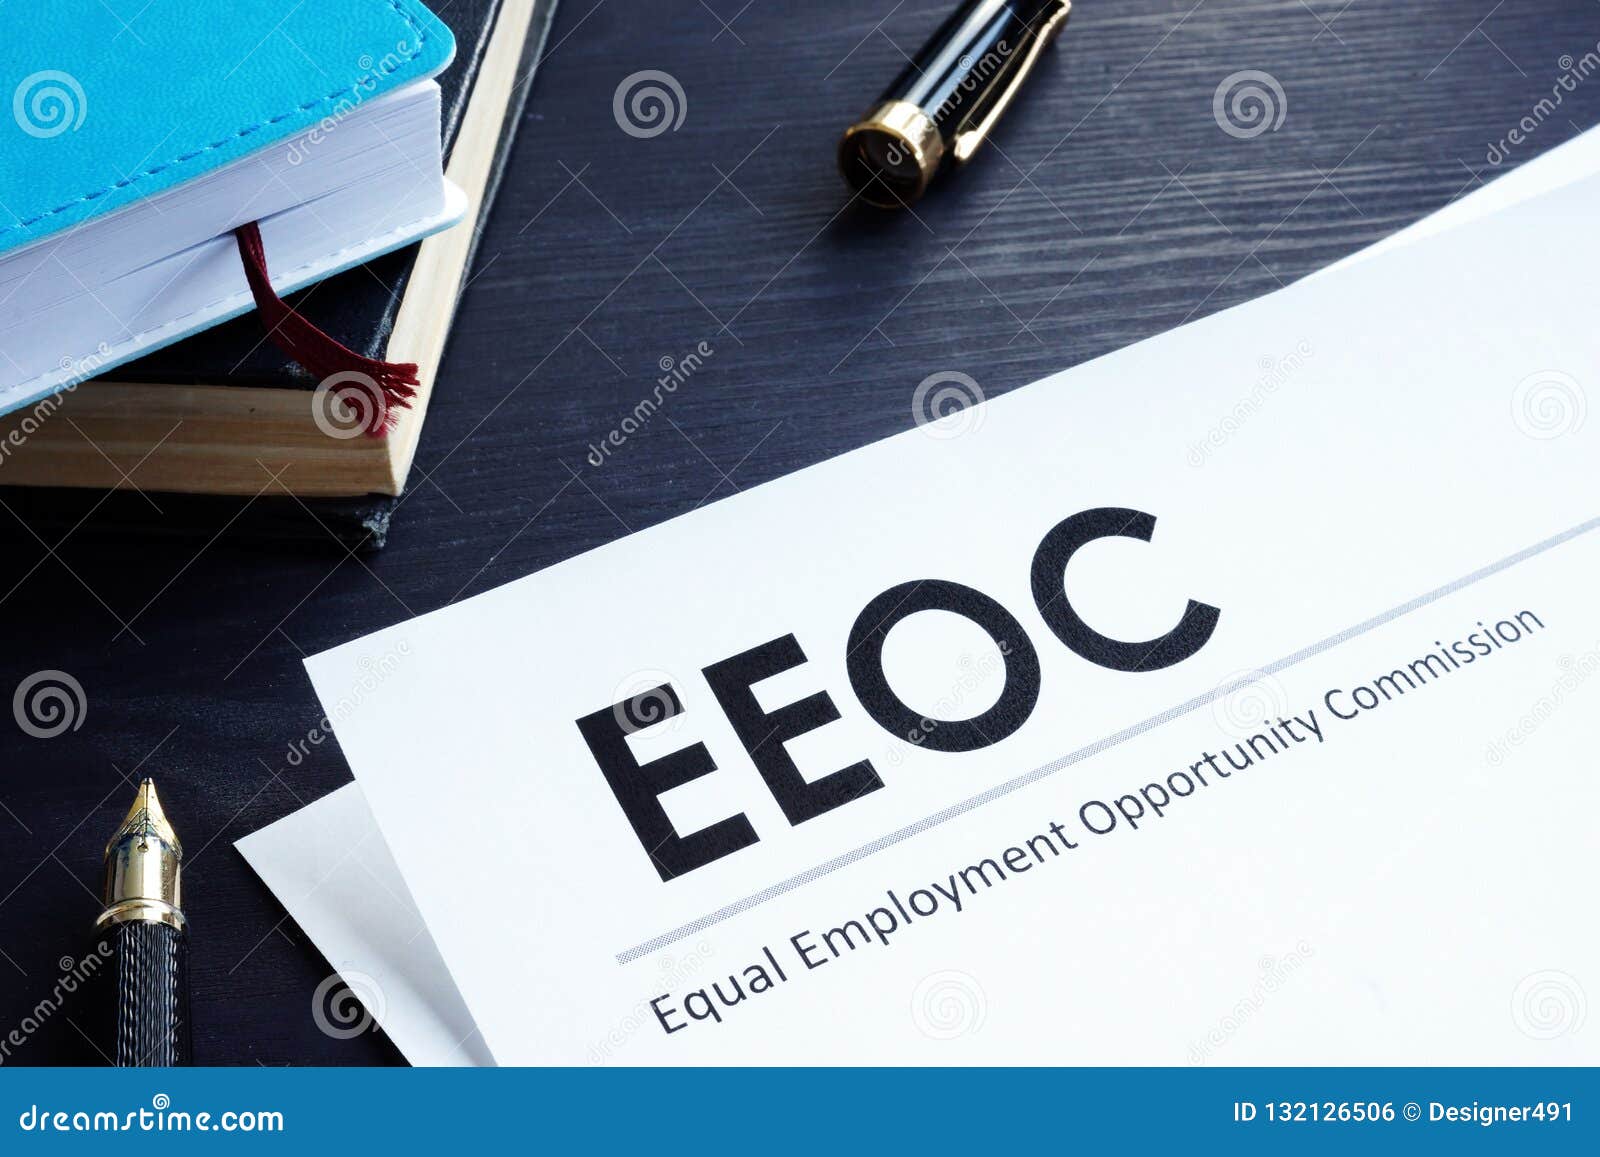 equal employment opportunity commission eeoc document and pen on a table